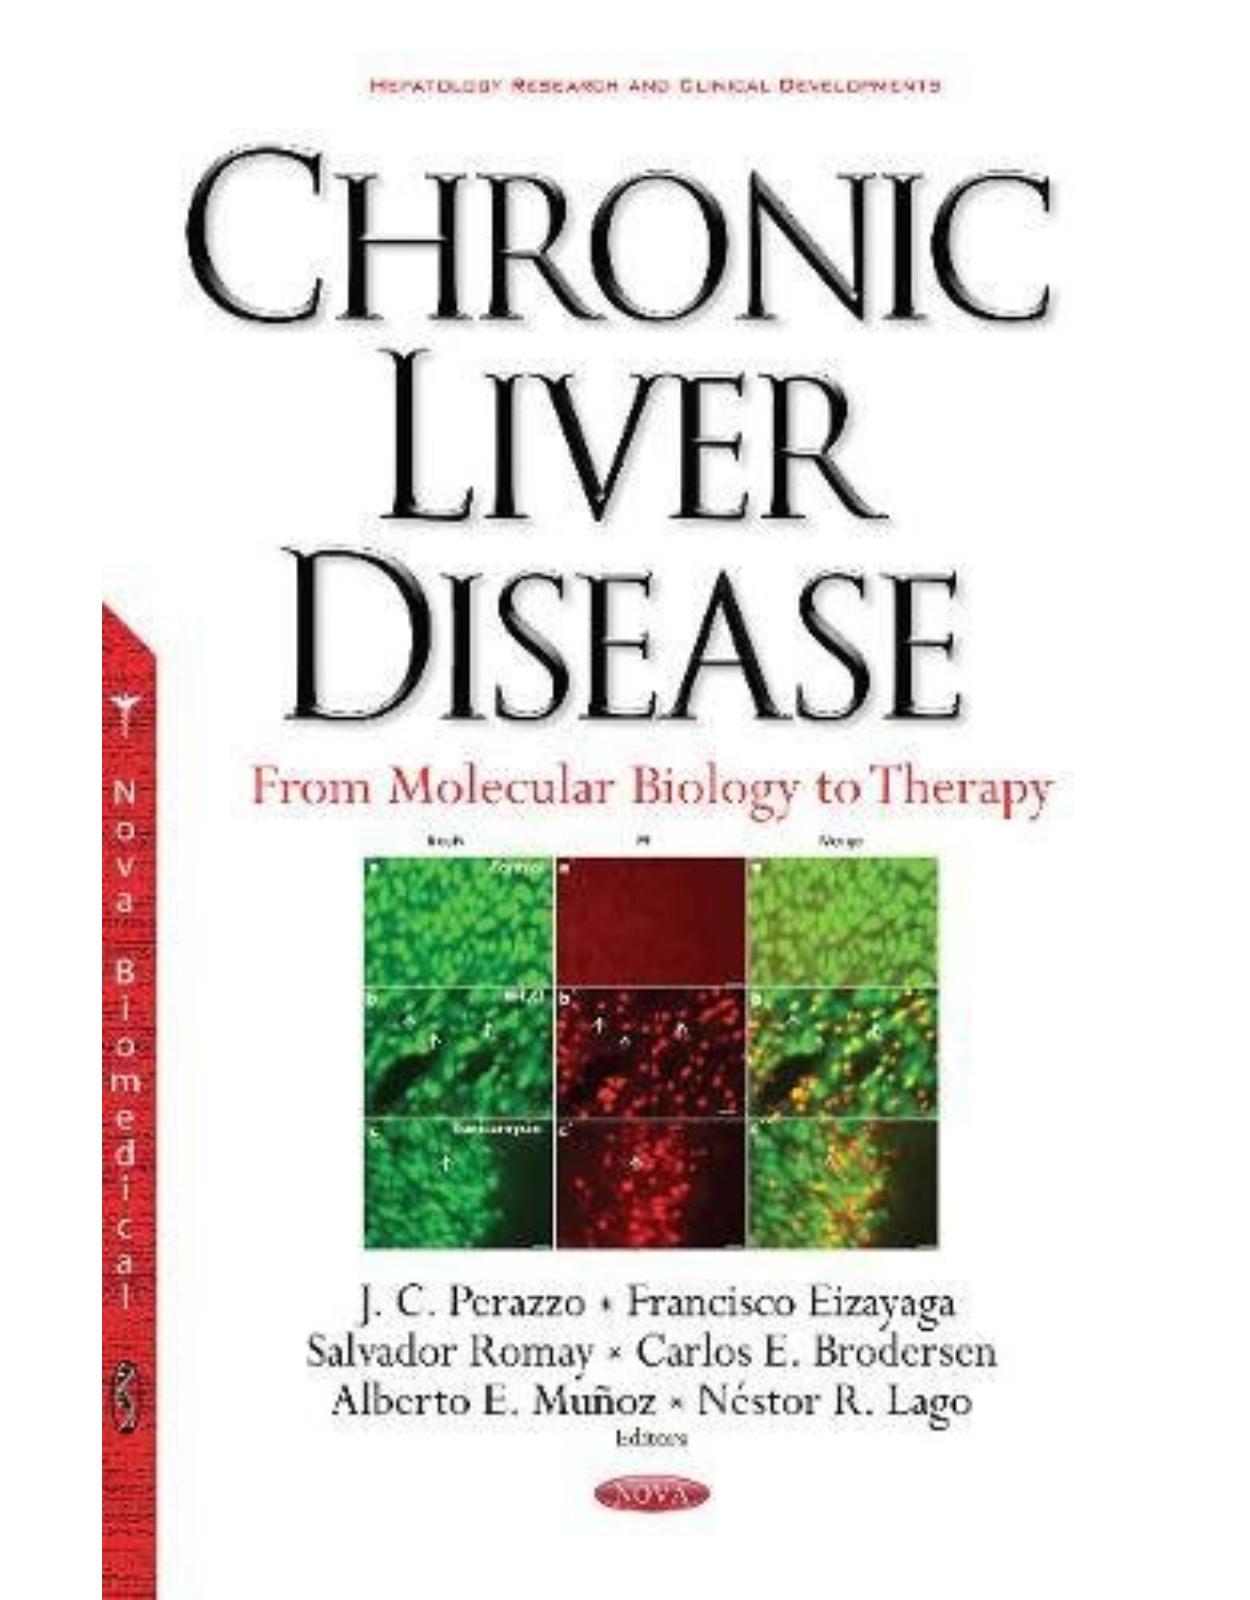 Chronic Liver Disease: From Molecular Biology to Therapy